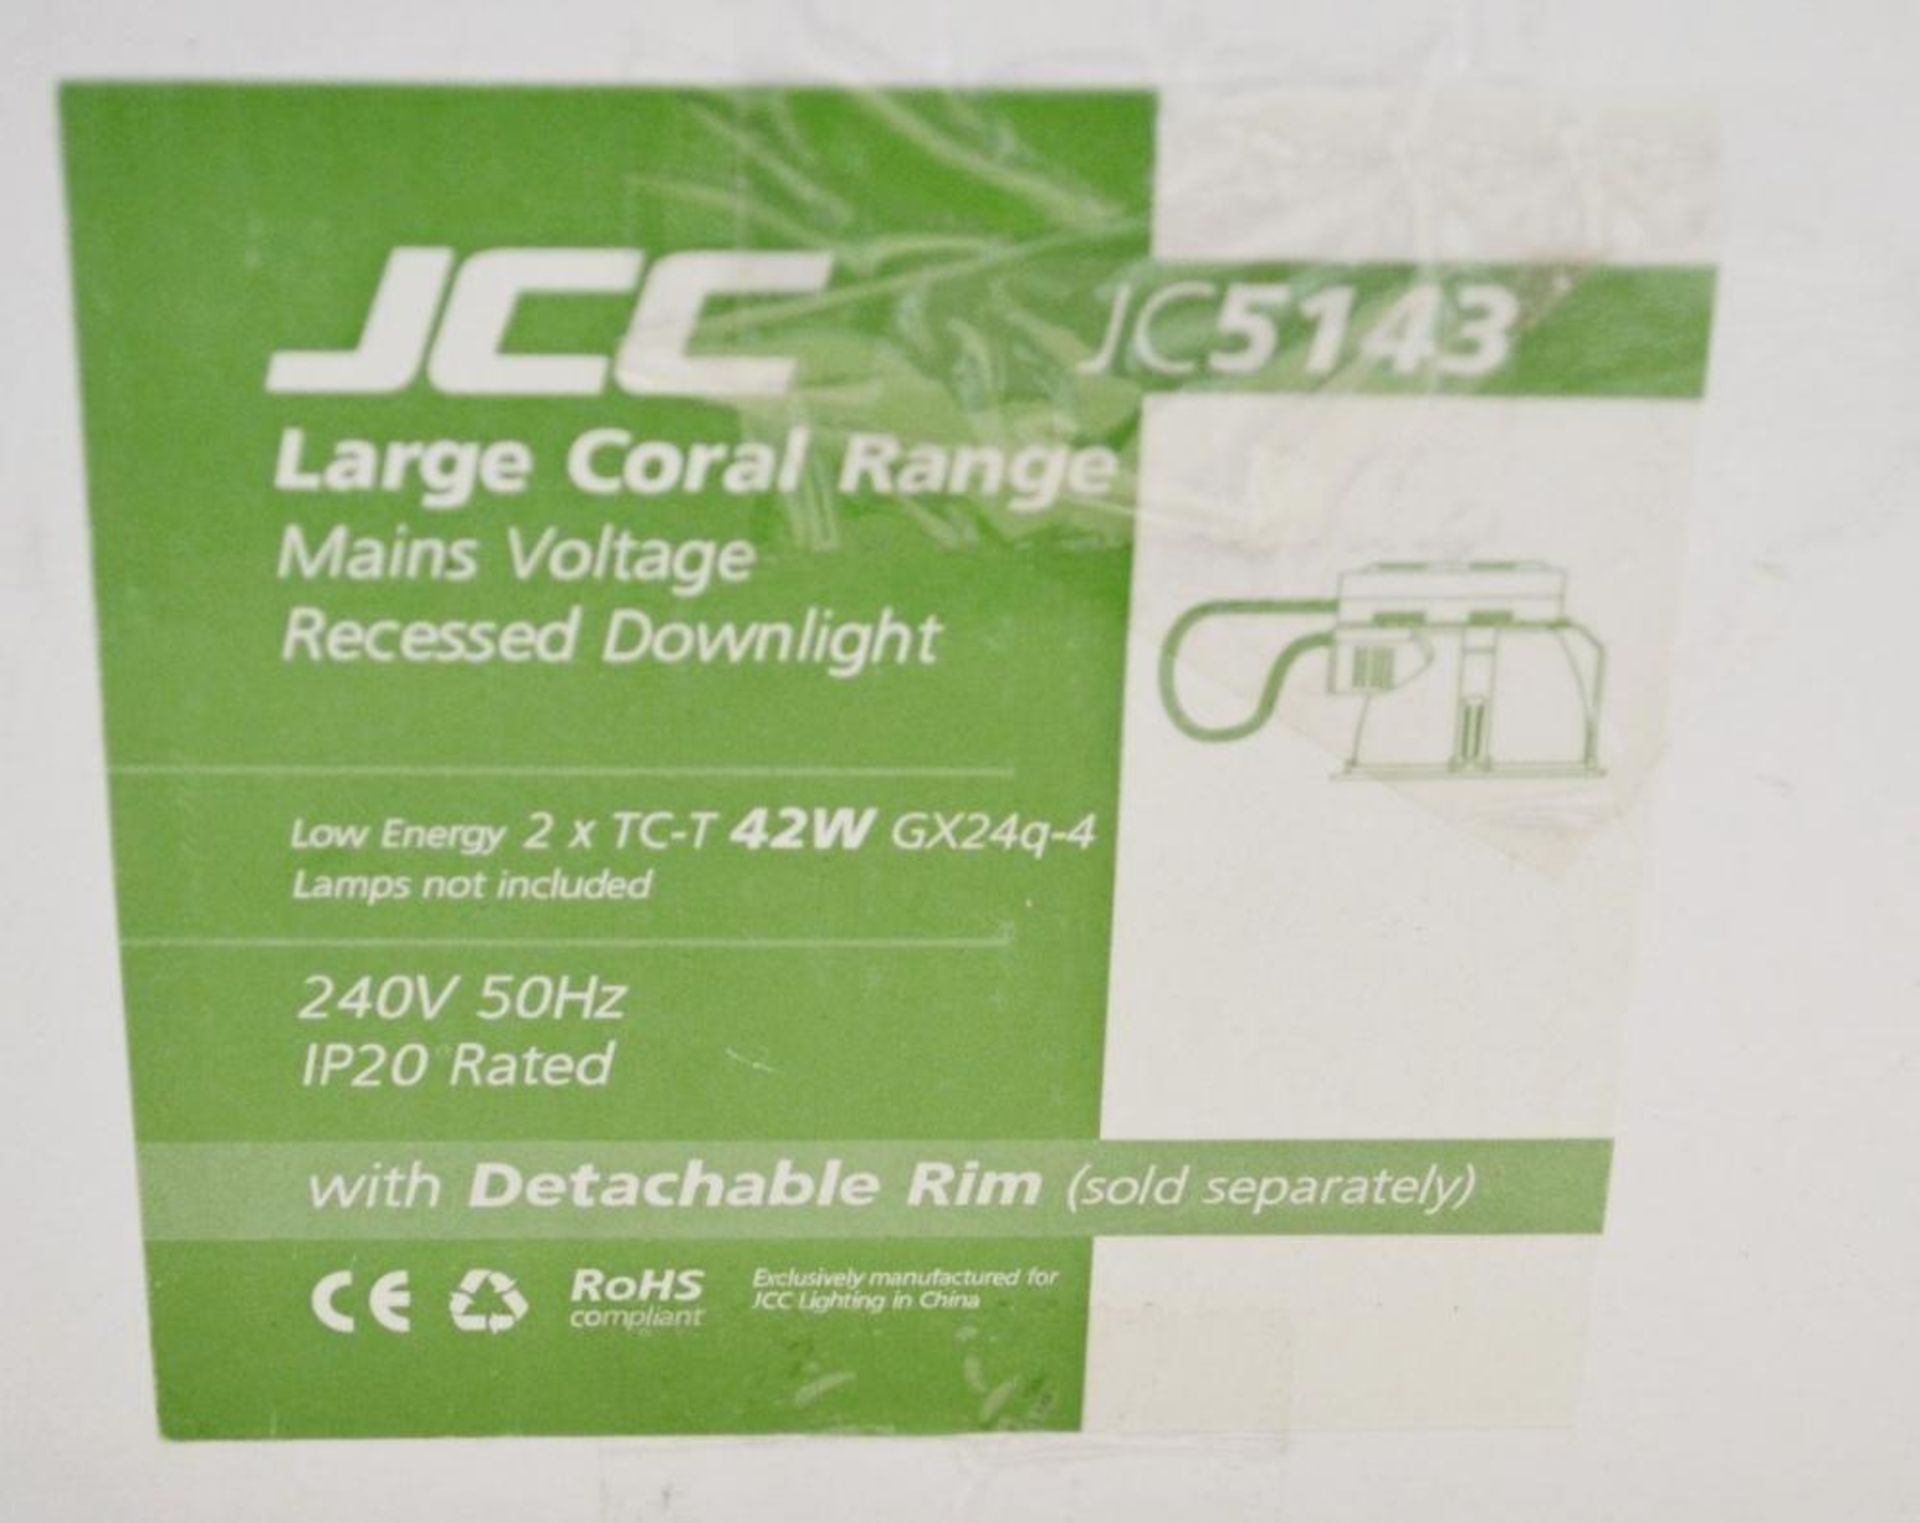 10 x JCC Lighting JC5143 Large Coral Range Commercial Recessed Downlight - Colour: Silver - Low - Image 6 of 8